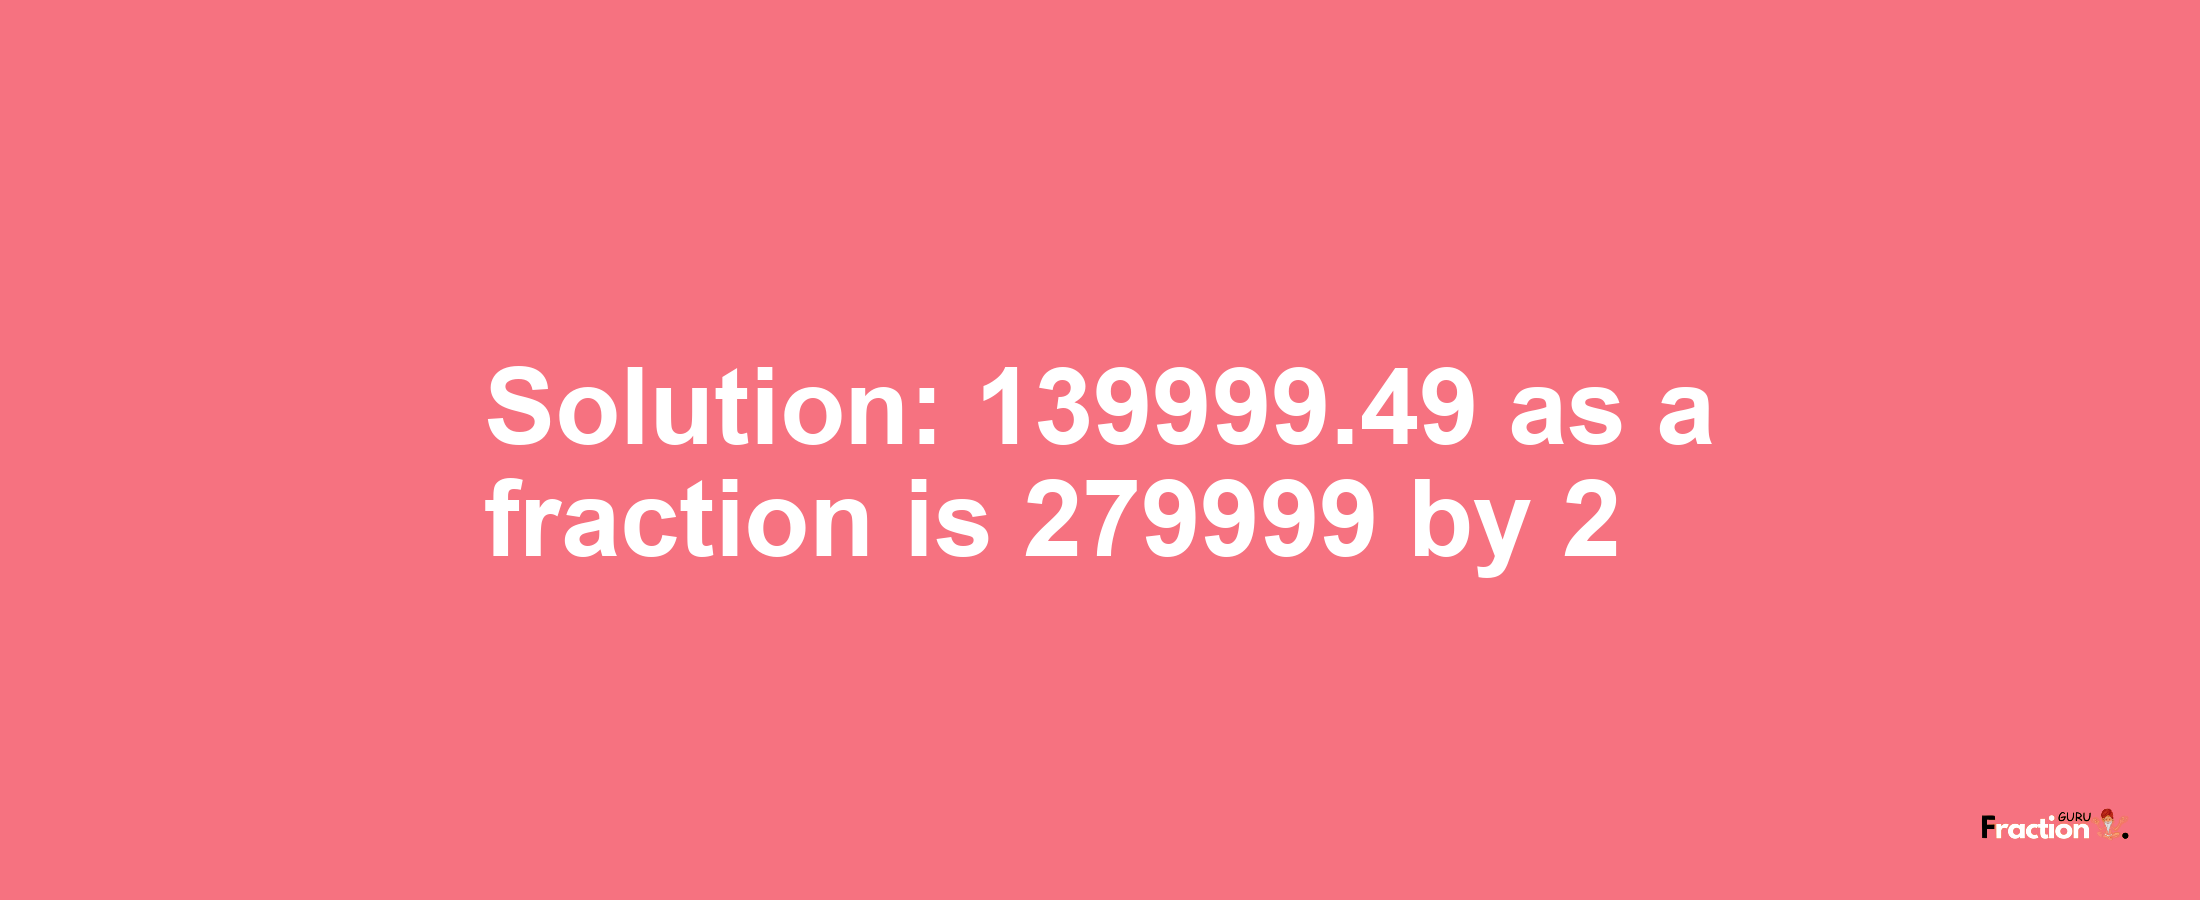 Solution:139999.49 as a fraction is 279999/2